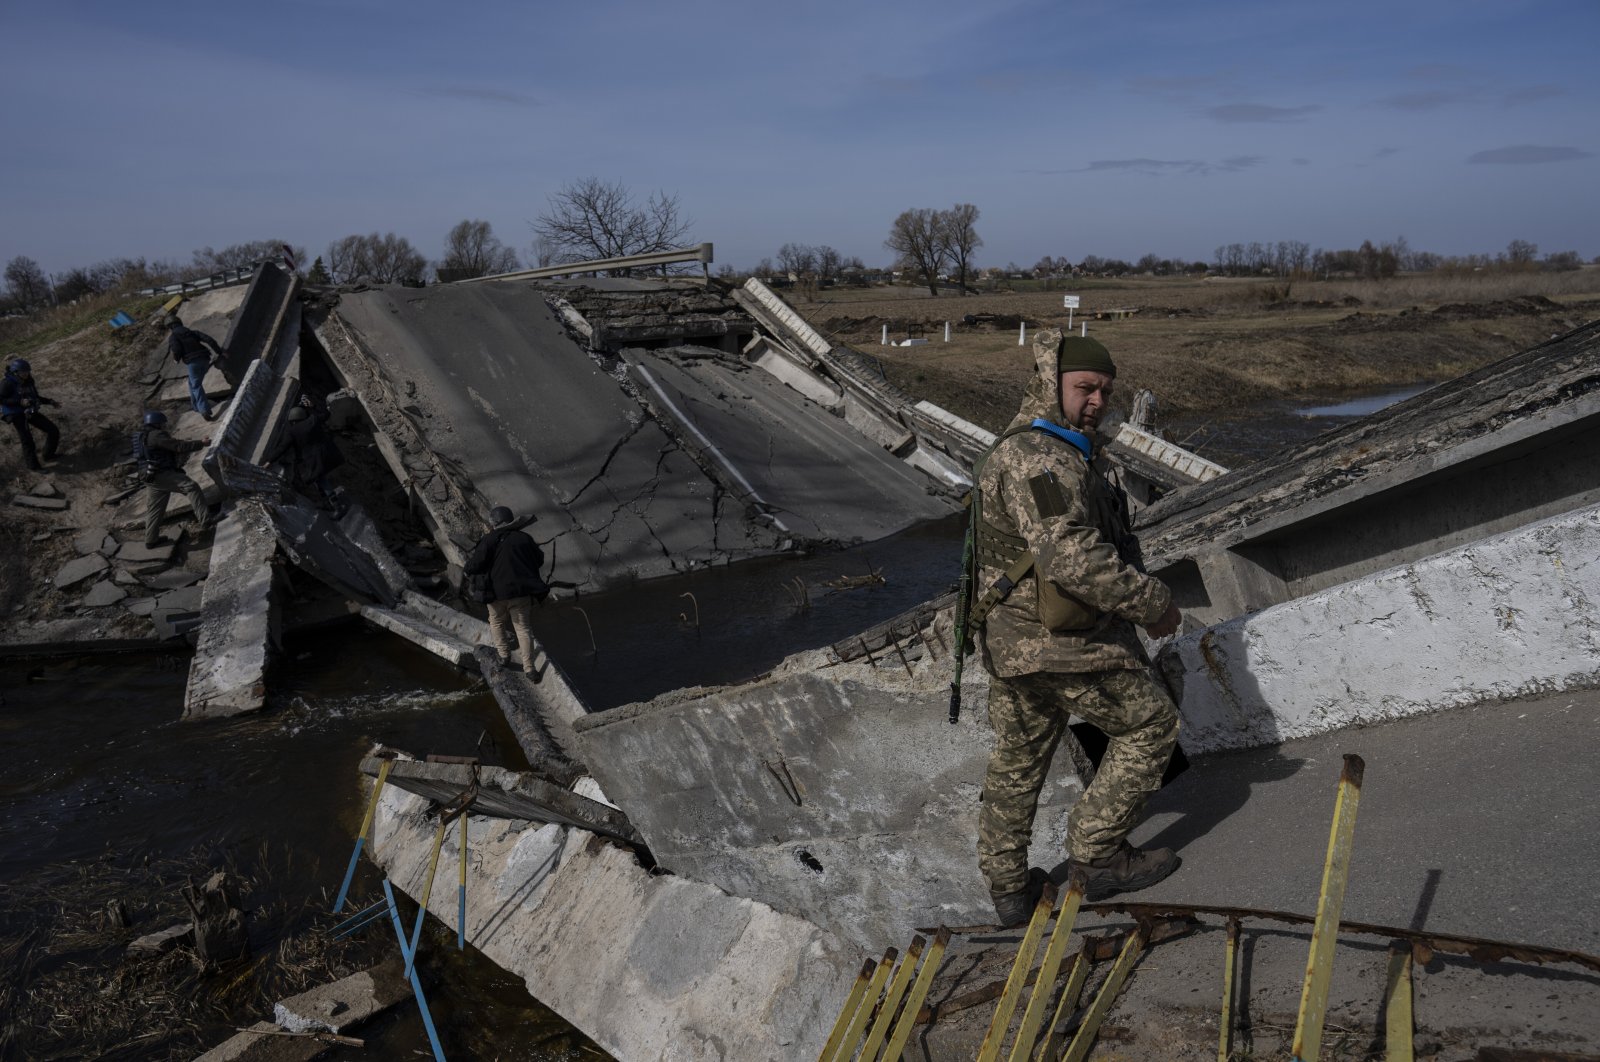 A soldier stands on a bridge destroyed by the Ukrainian army to prevent the passage of Russian tanks near Brovary, on the outskirts of Kyiv, Ukraine, March 28, 2022. (AP Photo)